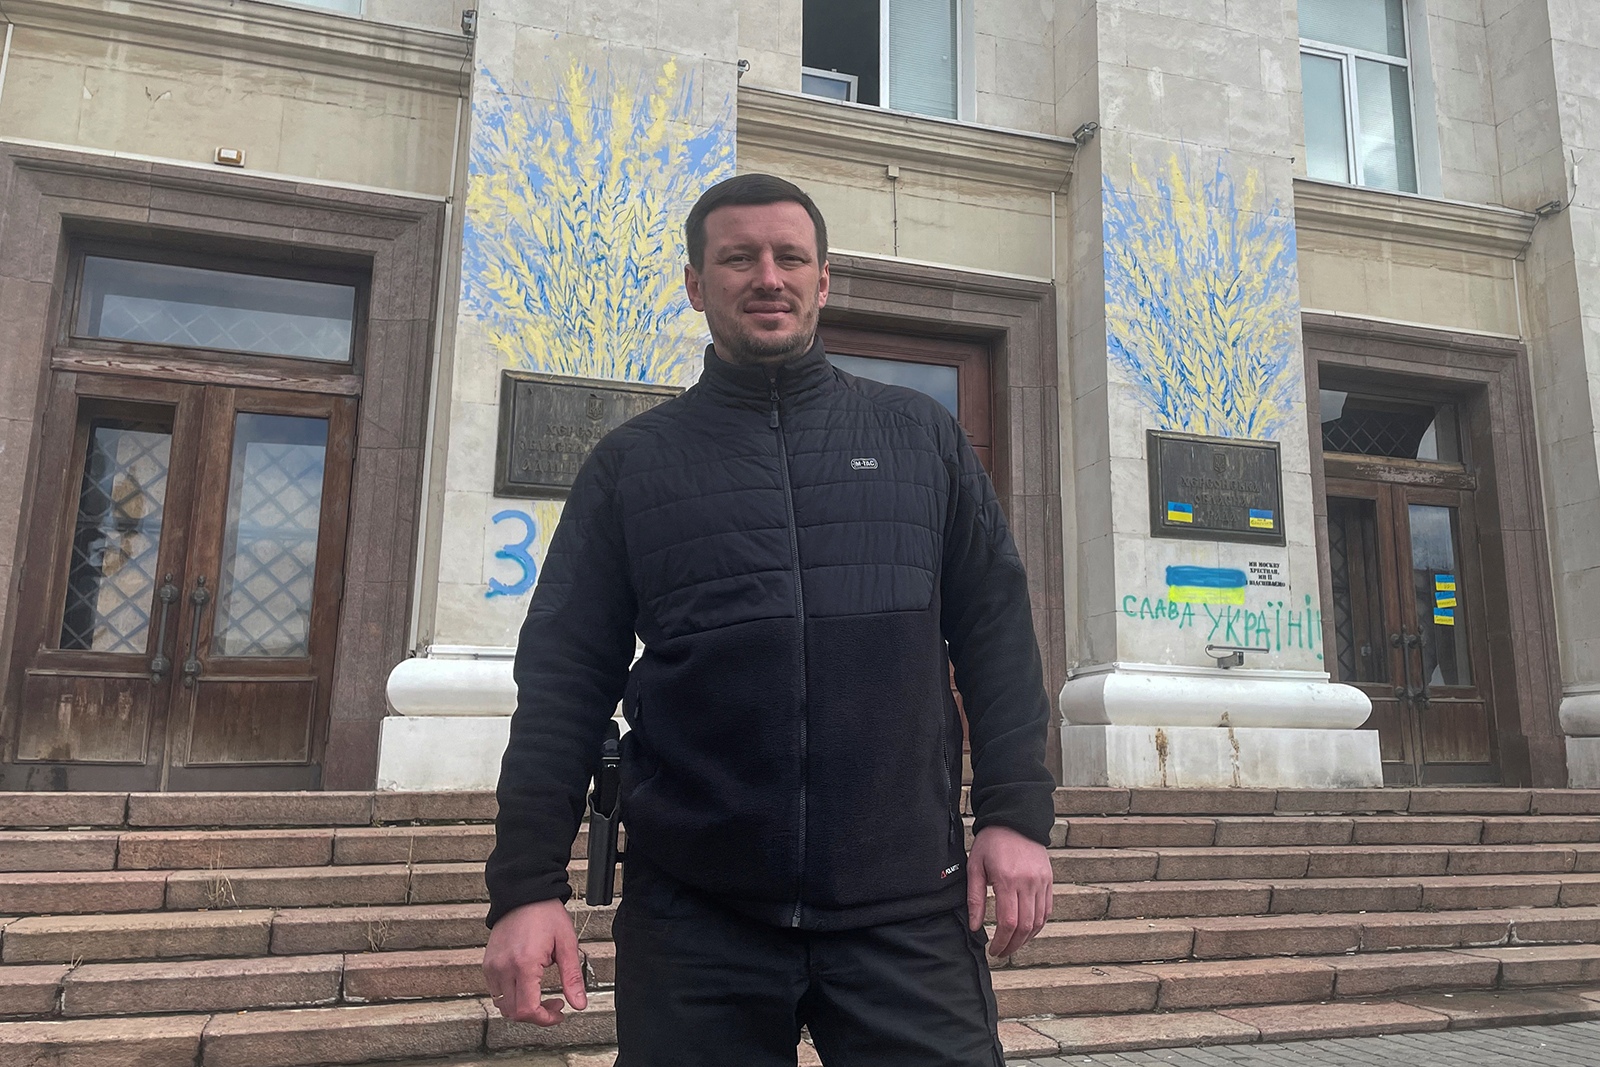 Oleksandr Prokudin poses for a picture during an interview in Kherson, Ukraine on February 22.